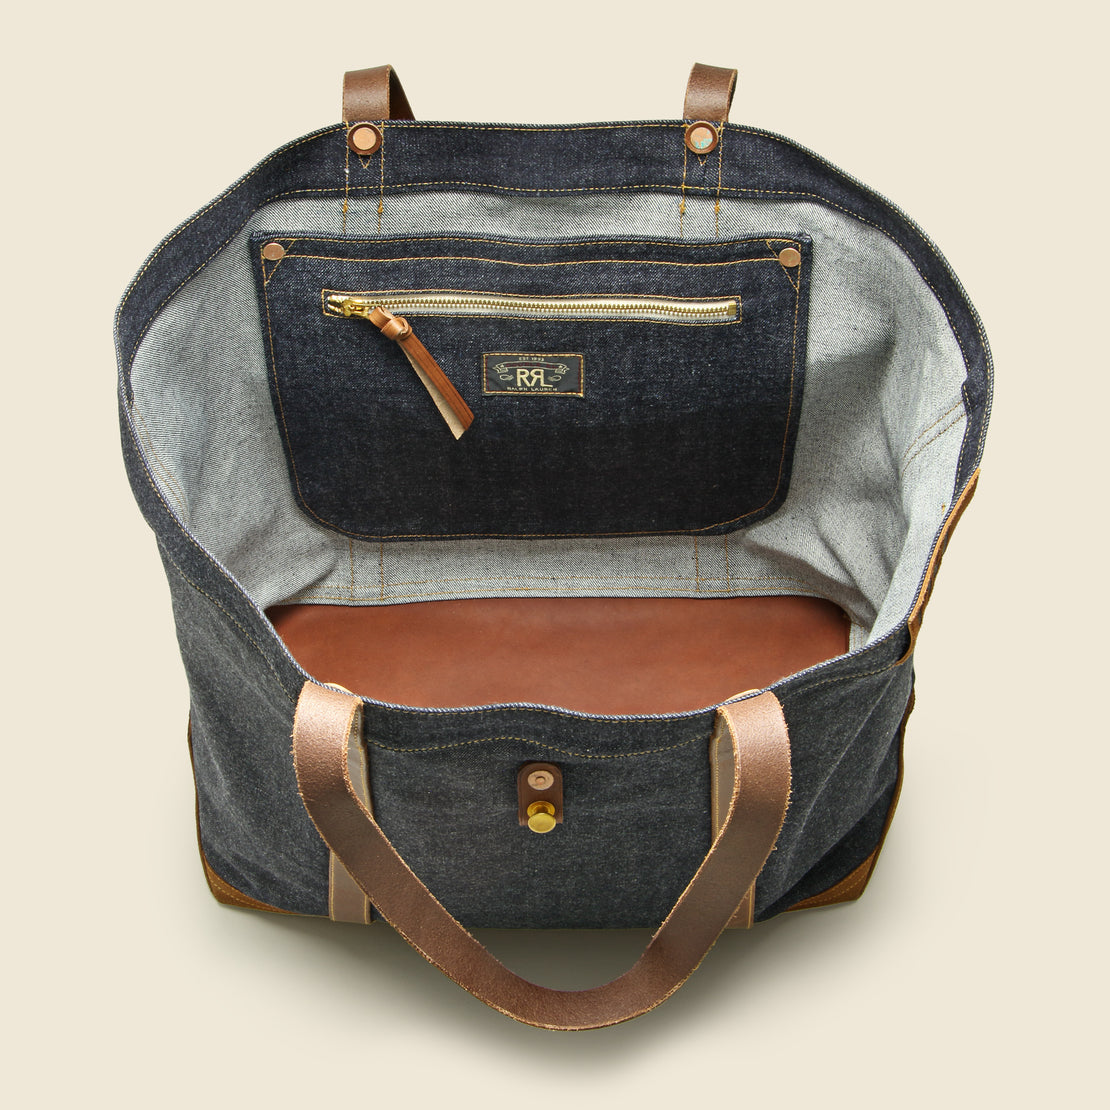 Howard Tote Bag - Denim/Leather - RRL - STAG Provisions - Accessories - Bags / Luggage